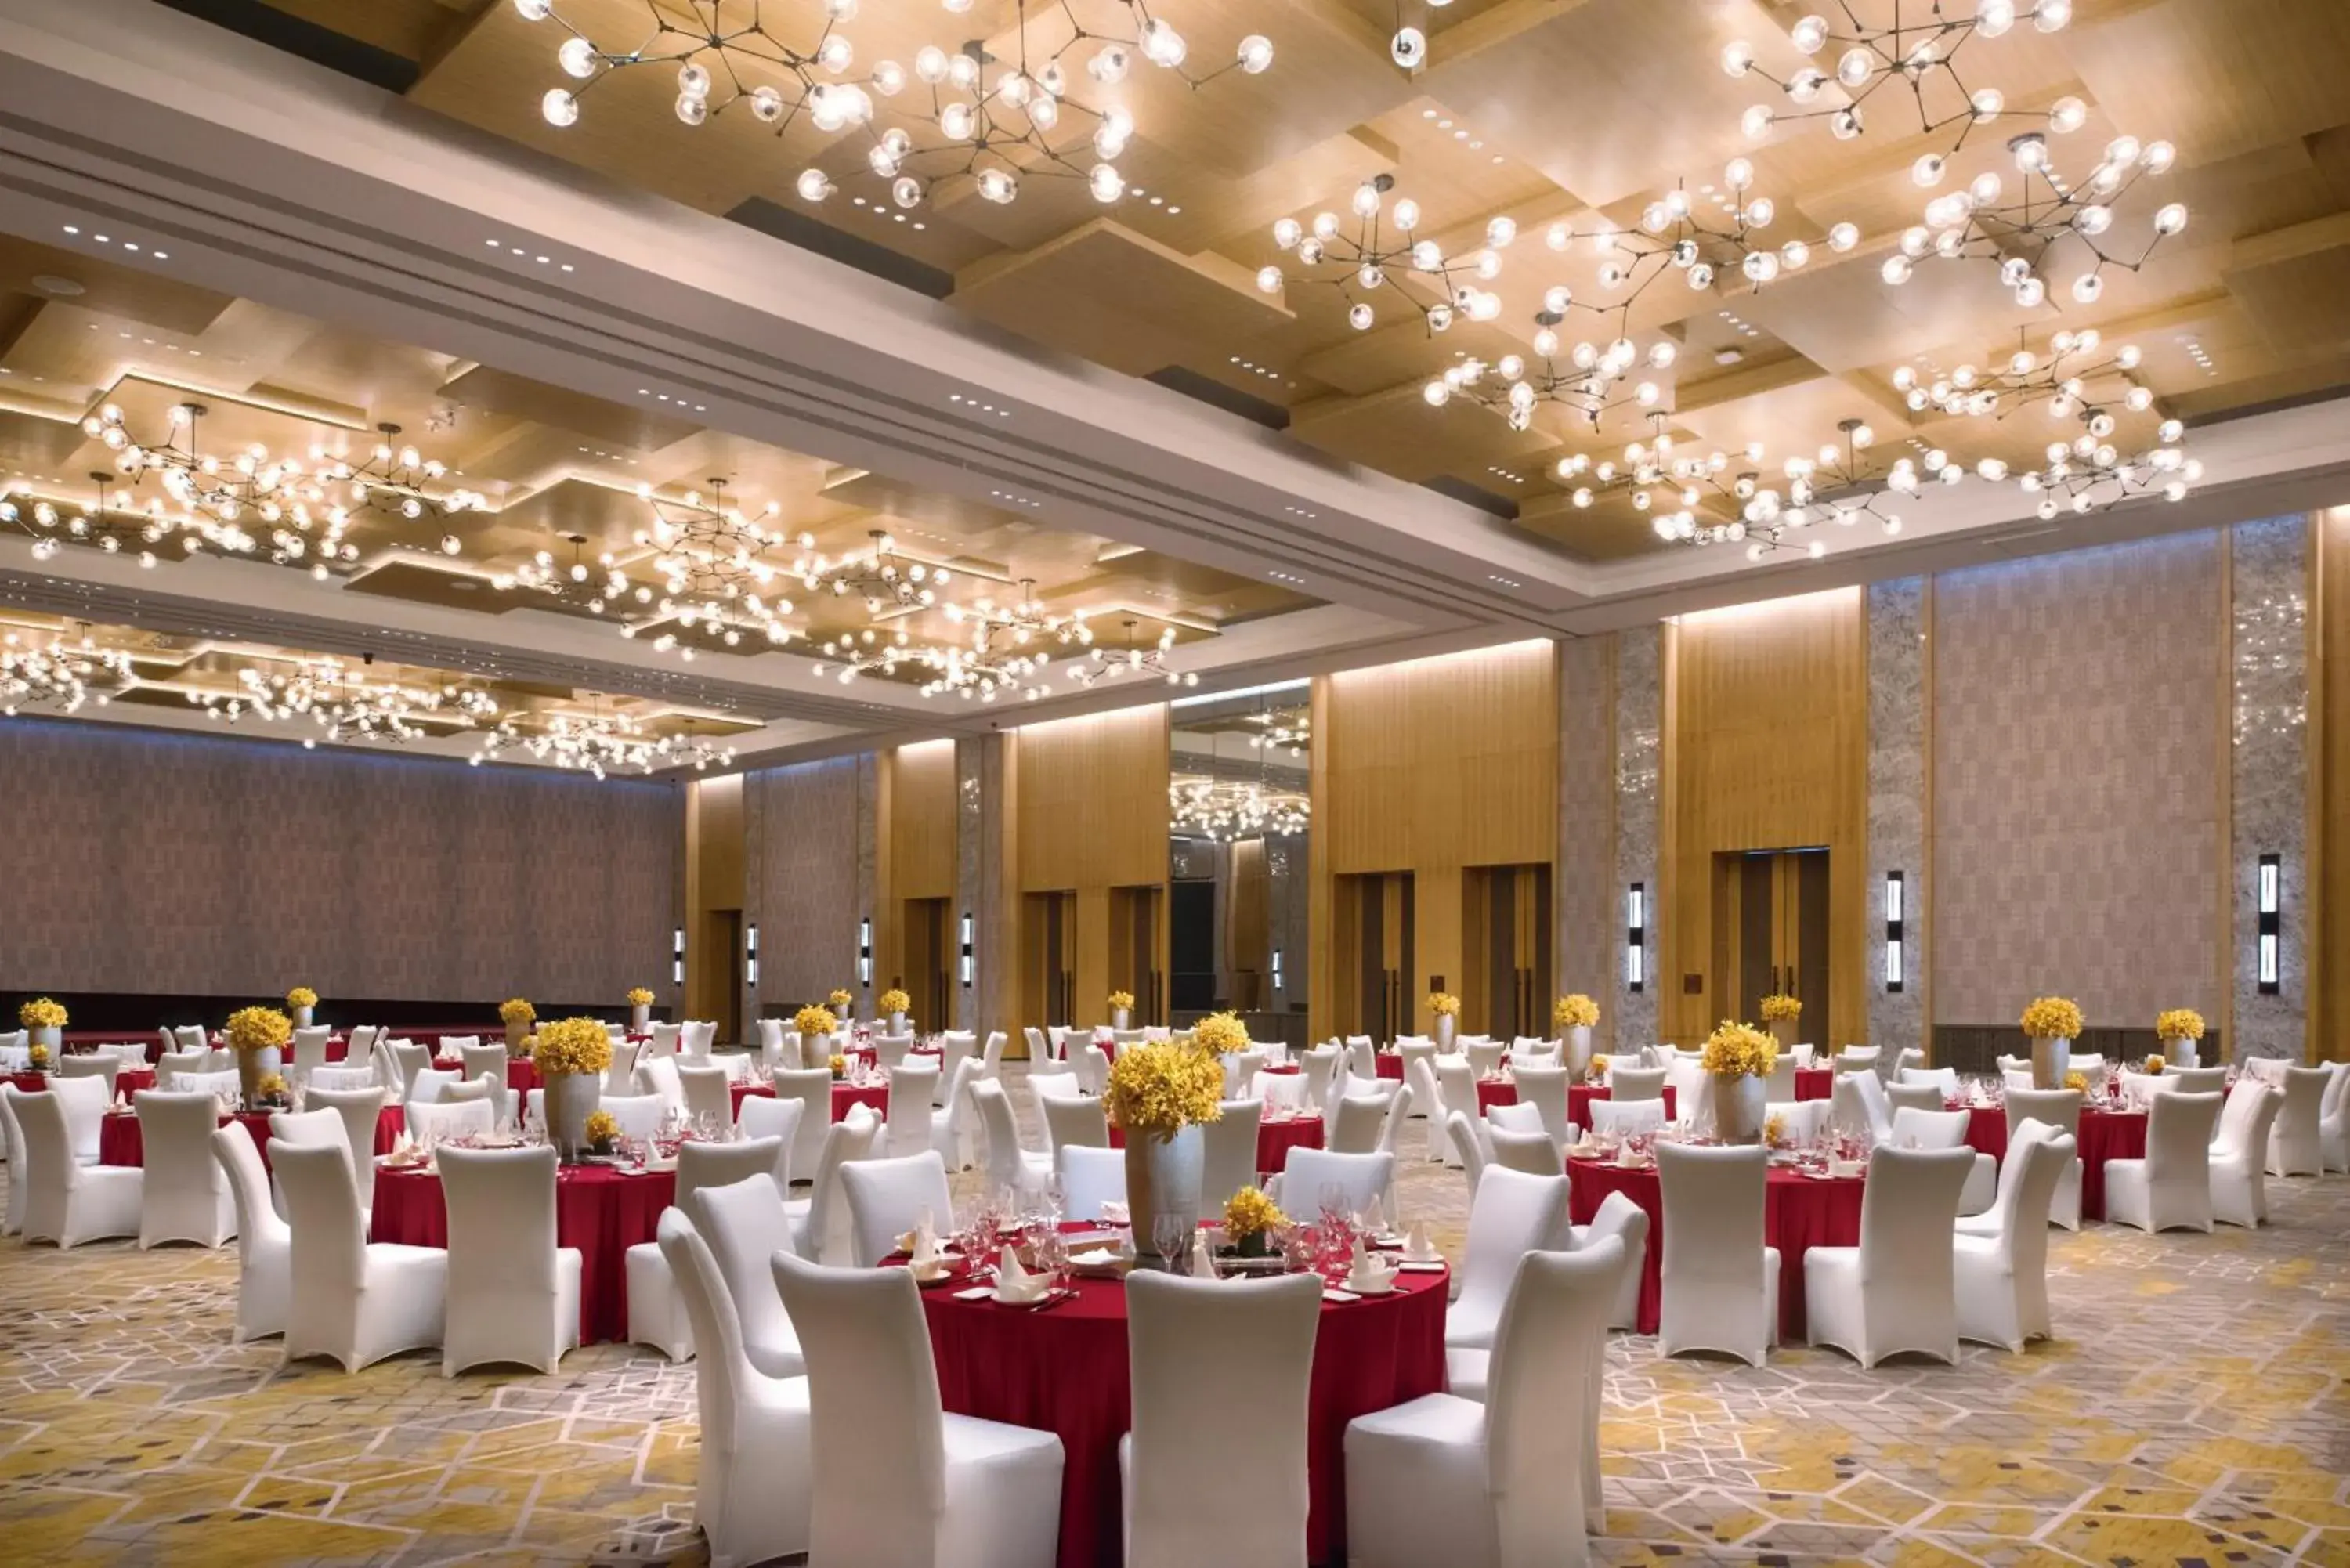 Banquet/Function facilities, Banquet Facilities in Crowne Plaza - Kunming Ancient Dian Town, an IHG Hotel